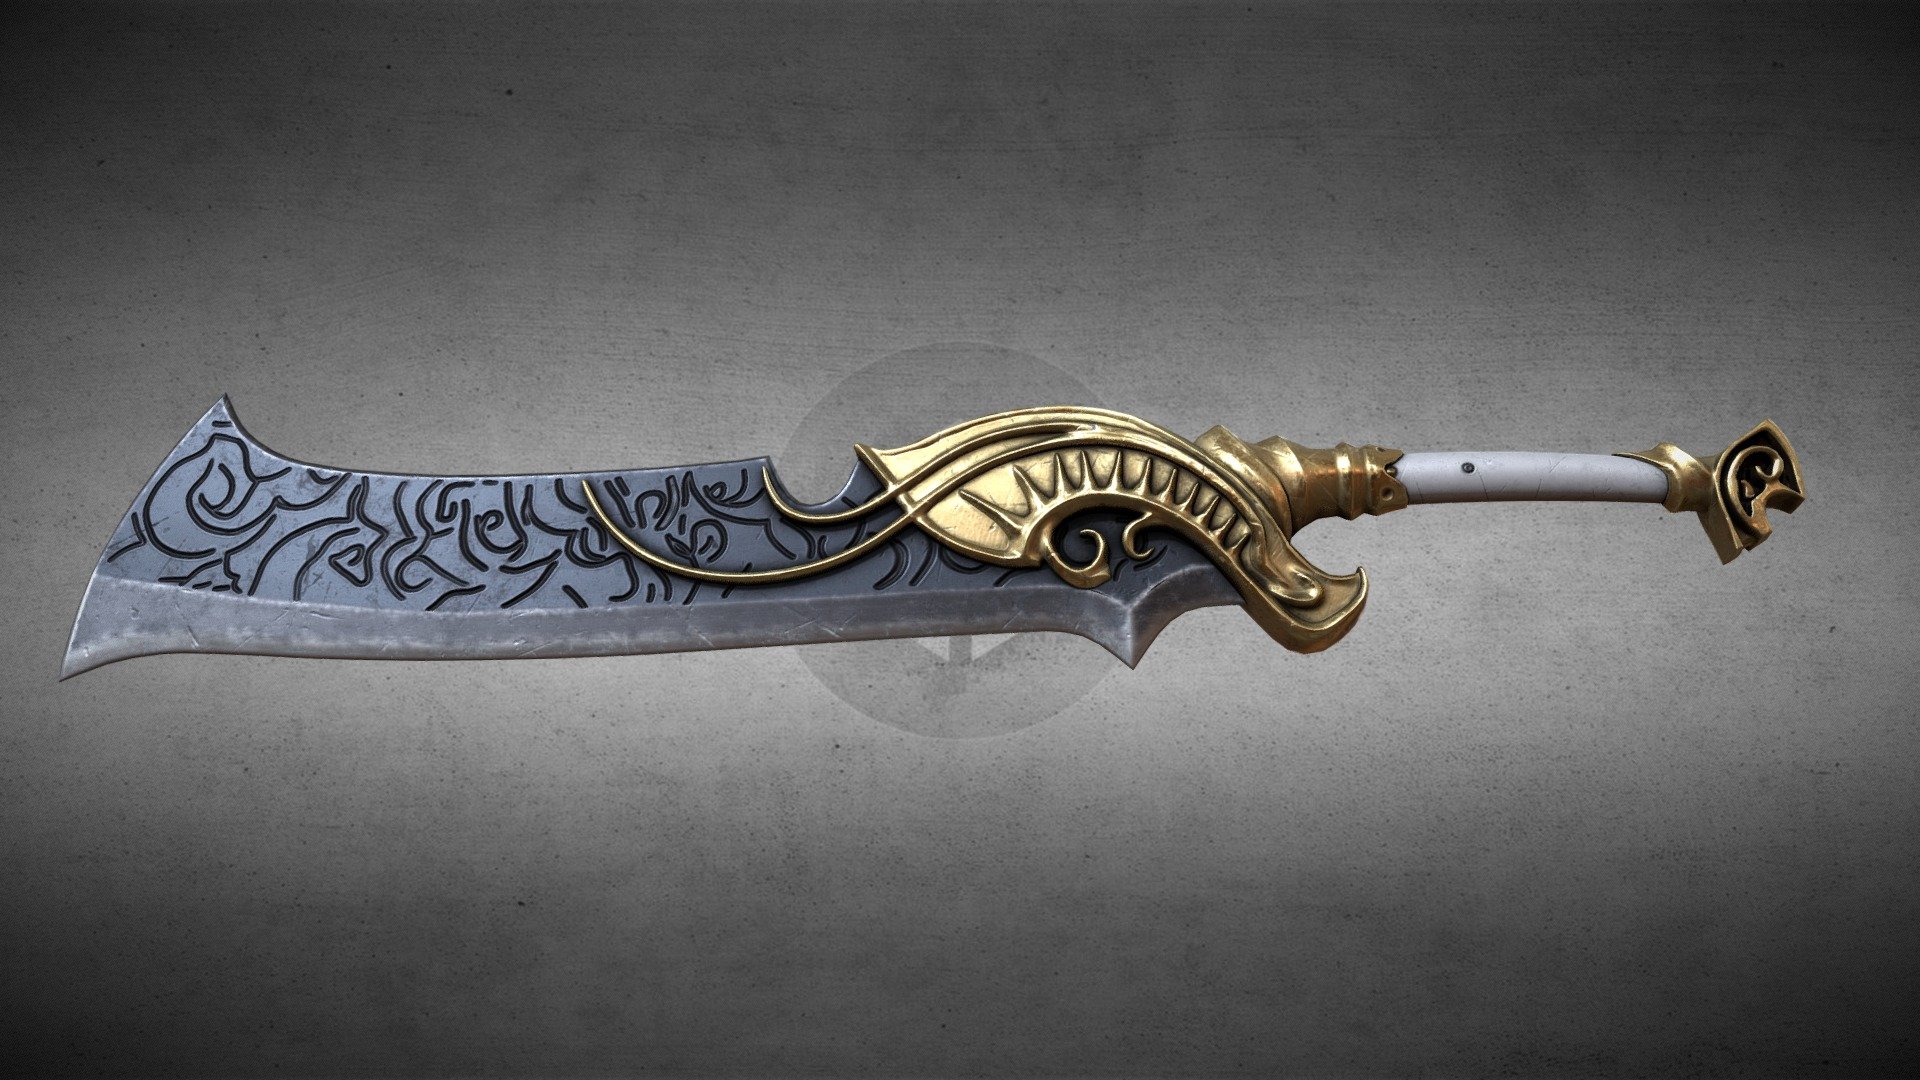 Low poly Game ready Fantasy Sword. Textures included: Albedo (Base Color), Normal, AO, Roughness and Metalic Maps. 2K texture maps - 2048 x 2048

Original concept of this sword belongs to Matthew &ldquo;Alki